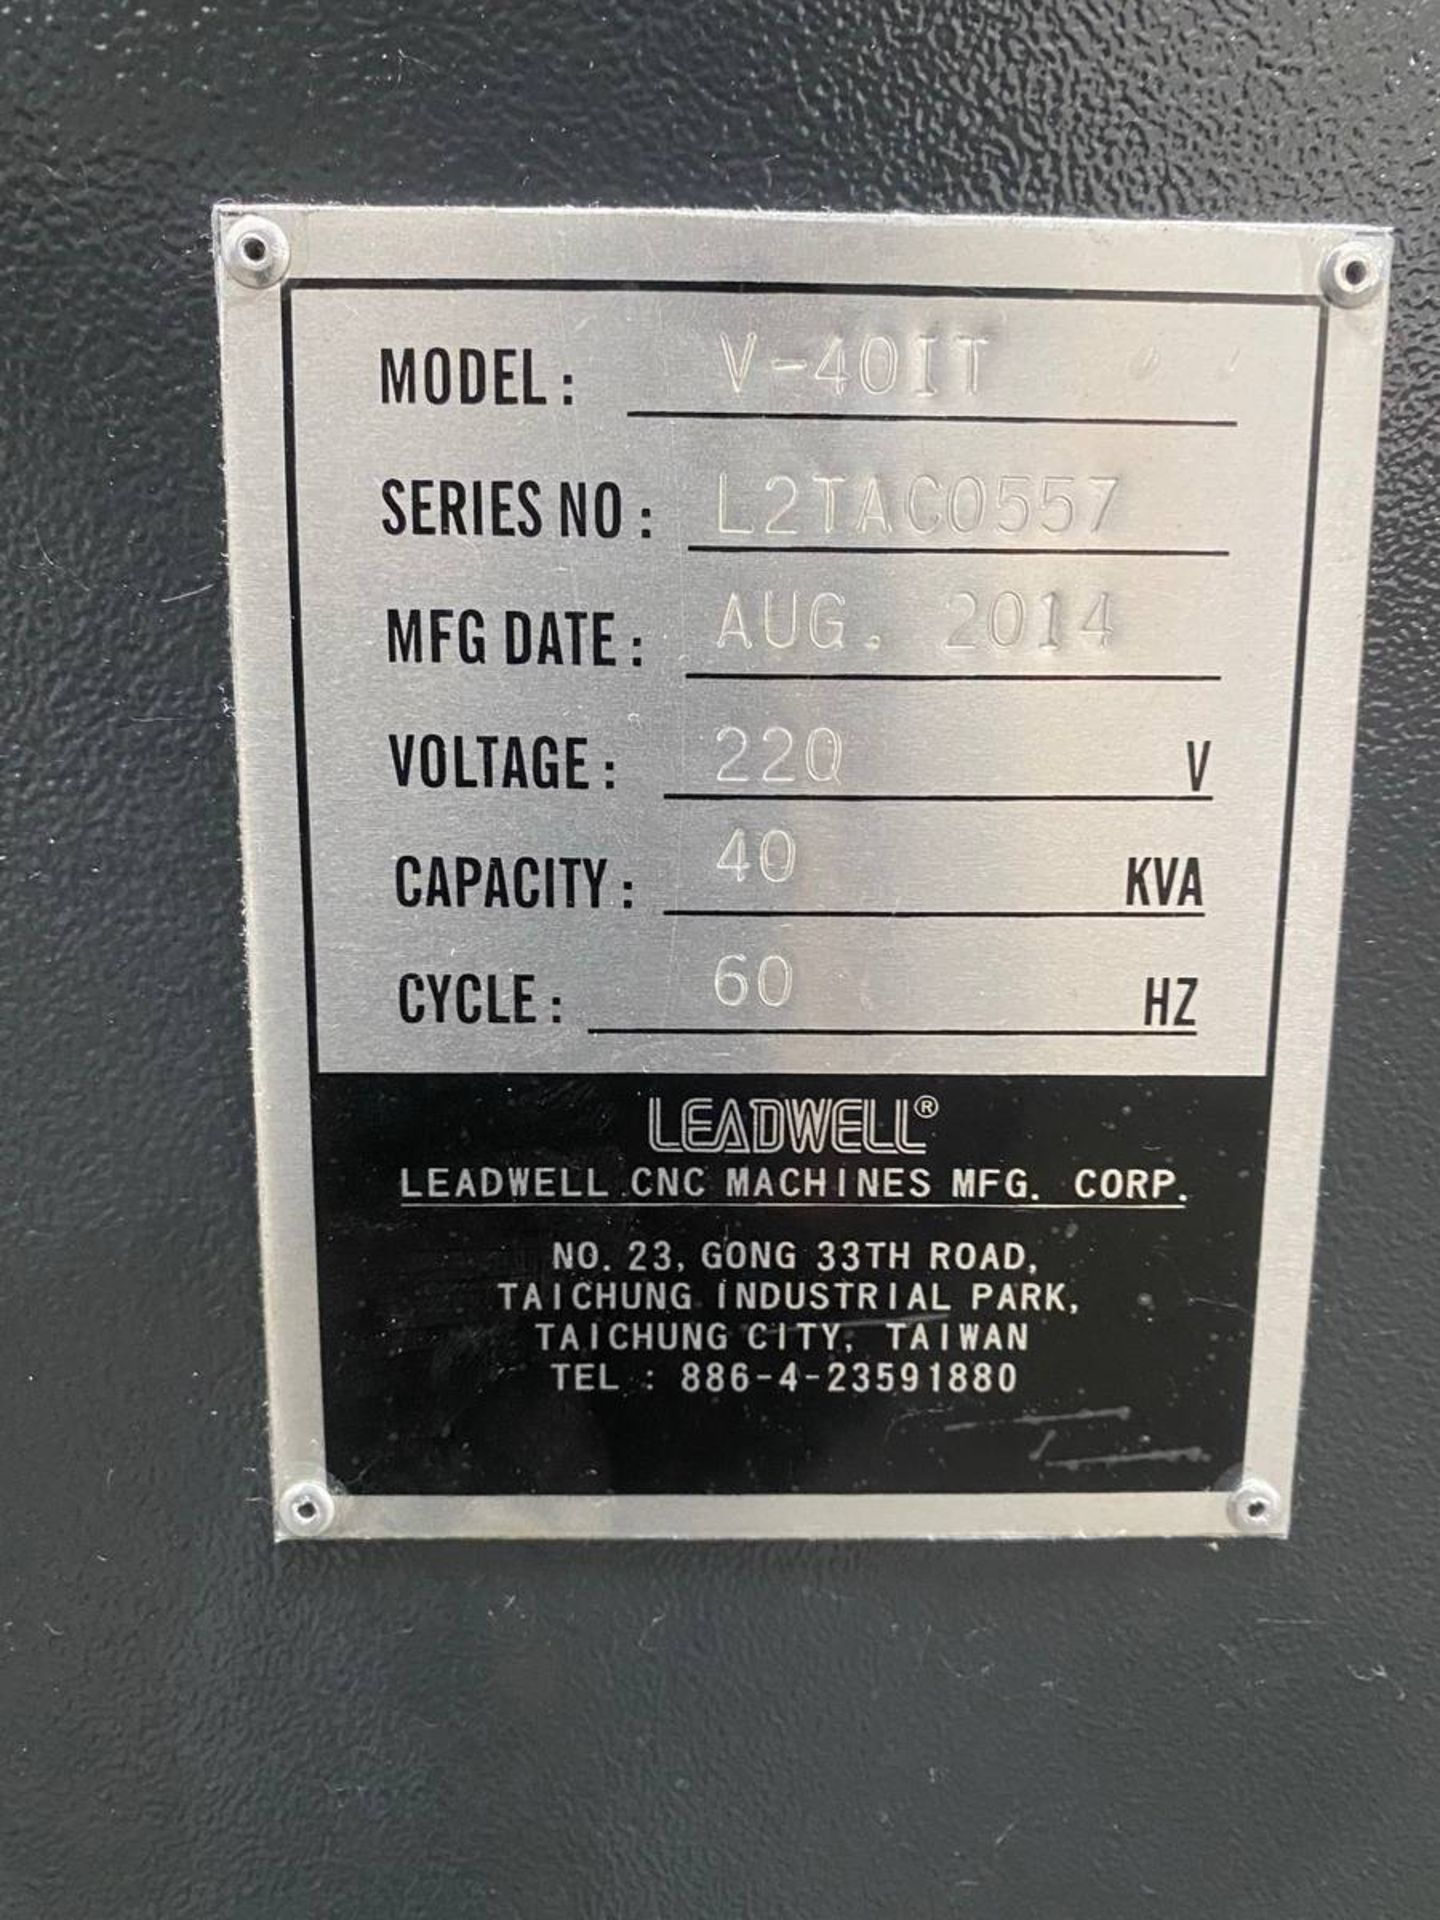 2014 Leadwell V-40IT CNC VERTICAL MACHINING CENTER - Image 22 of 22